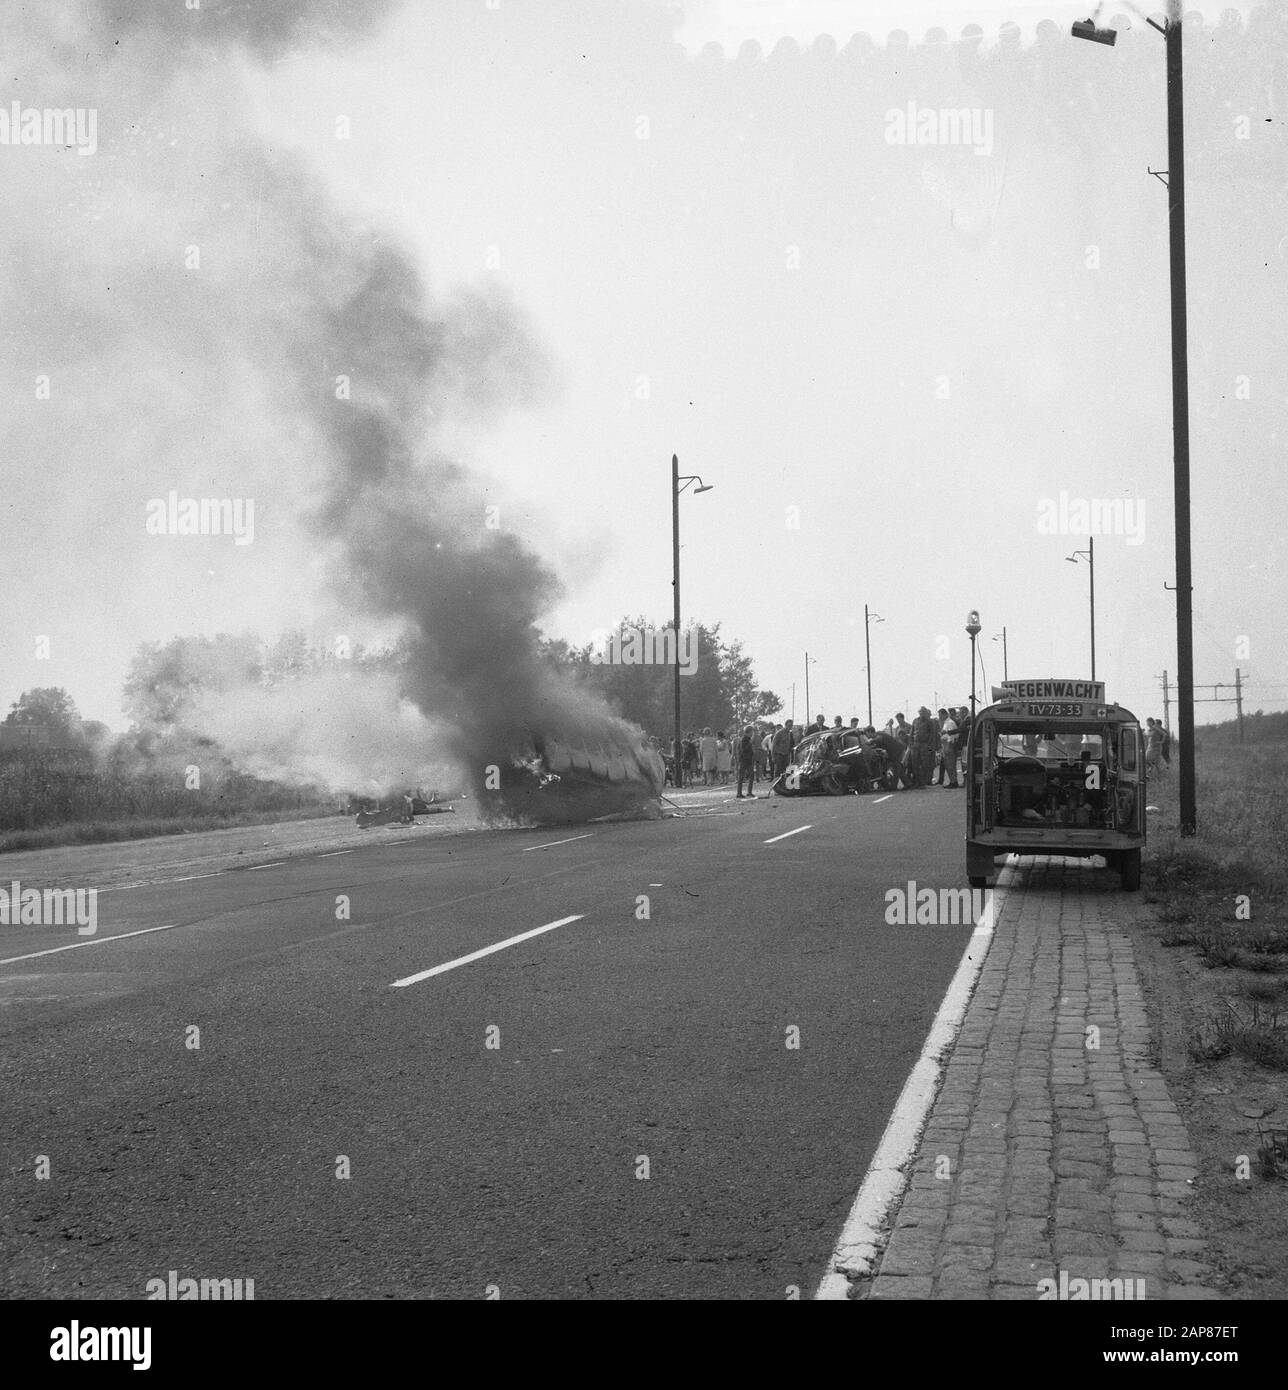 Car accident at the Haarlemmerweg in Amsterdam Description: Burning car with lots of smoke development Date: 10 september 1966 Location: Amsterdam, Noord-Holland Keywords: cars, car wrecks, fires Stock Photo